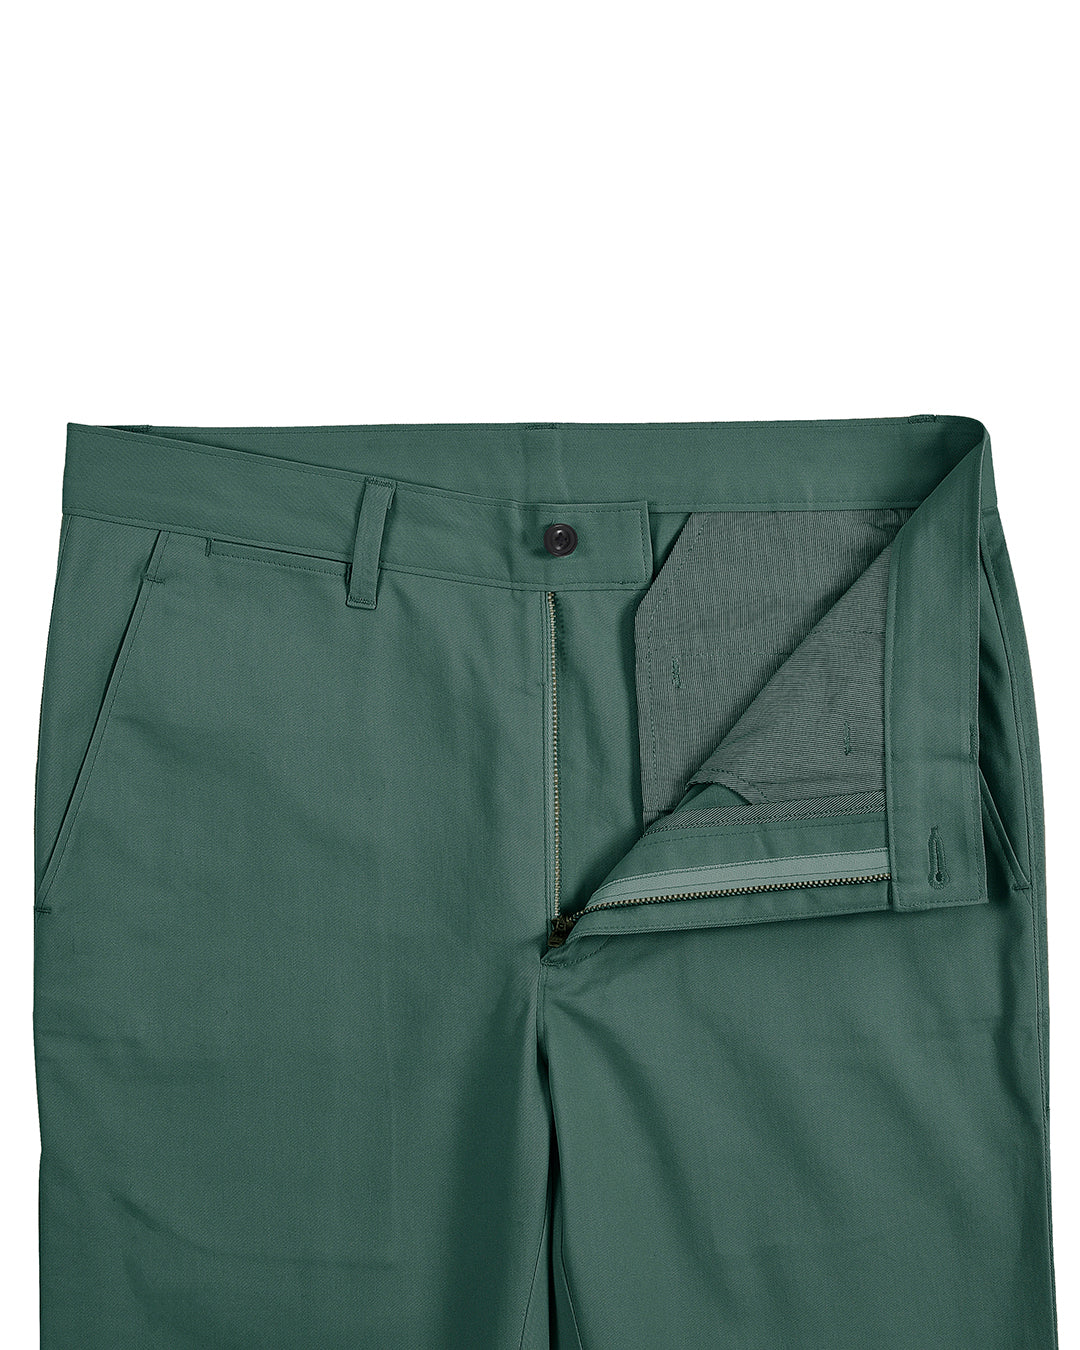 Open front view of custom Genoa Chino pants for men by Luxire in fern green